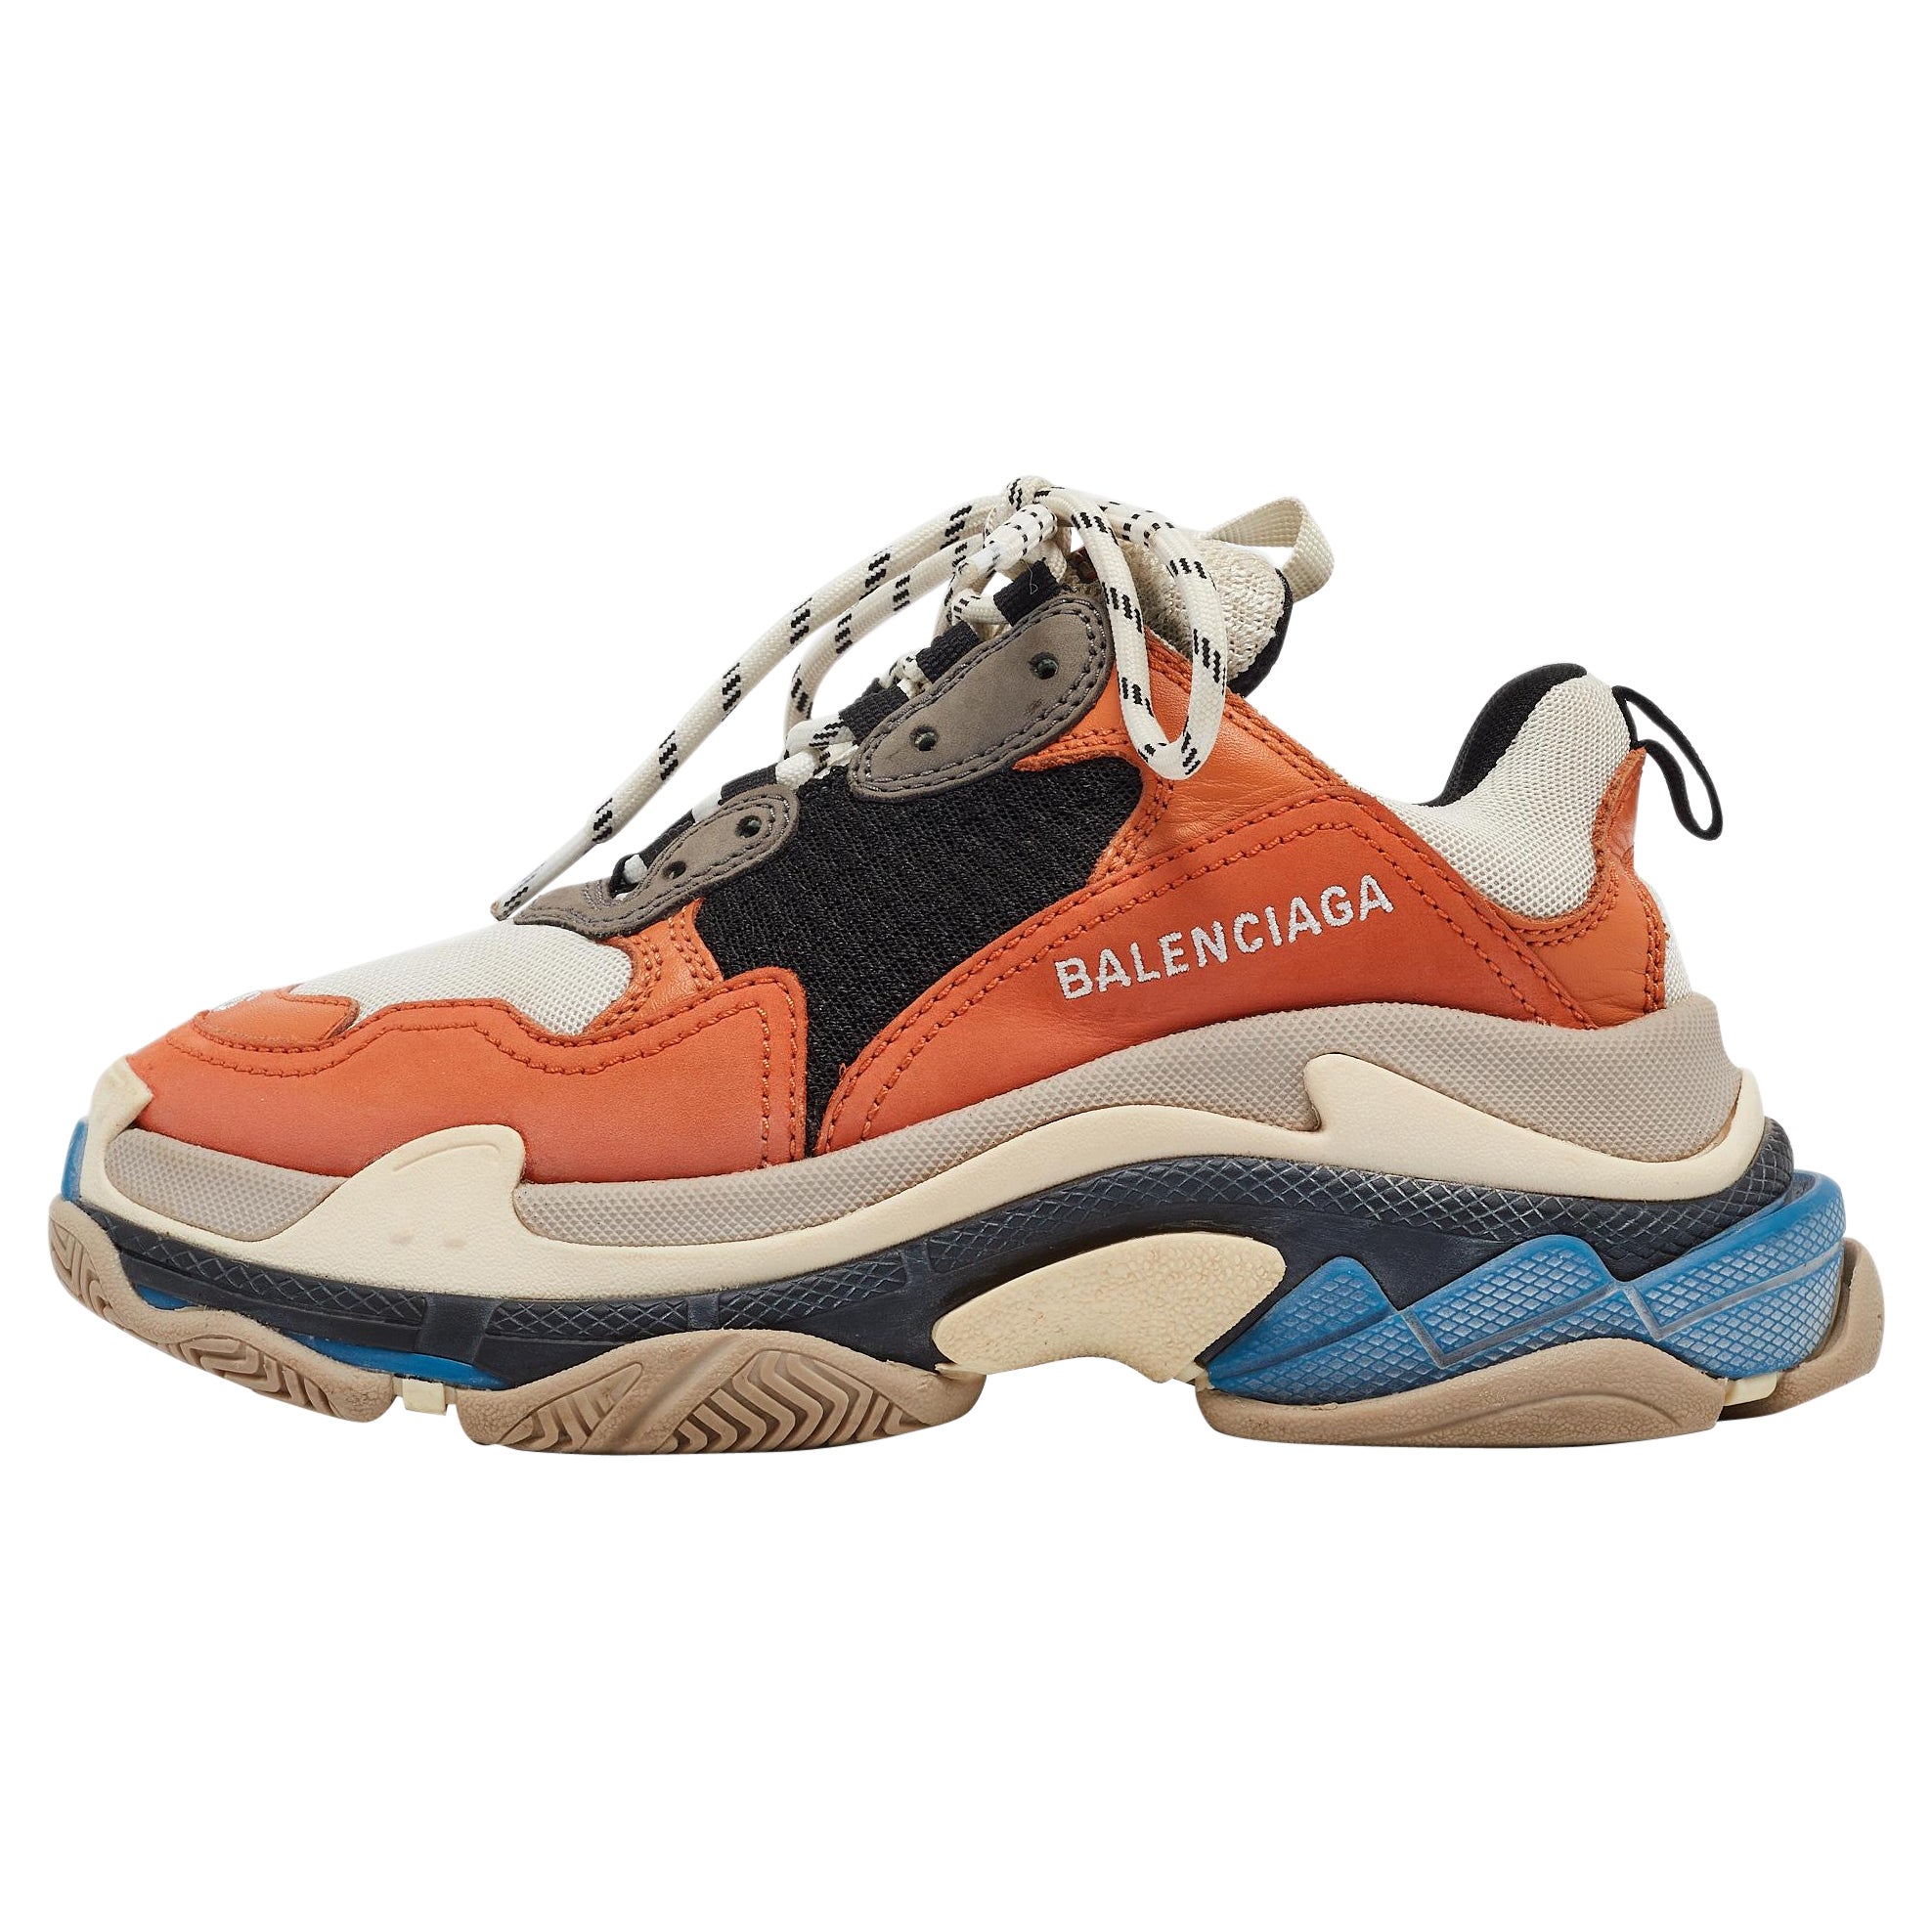 Do Balenciaga Triple S come with other laces?